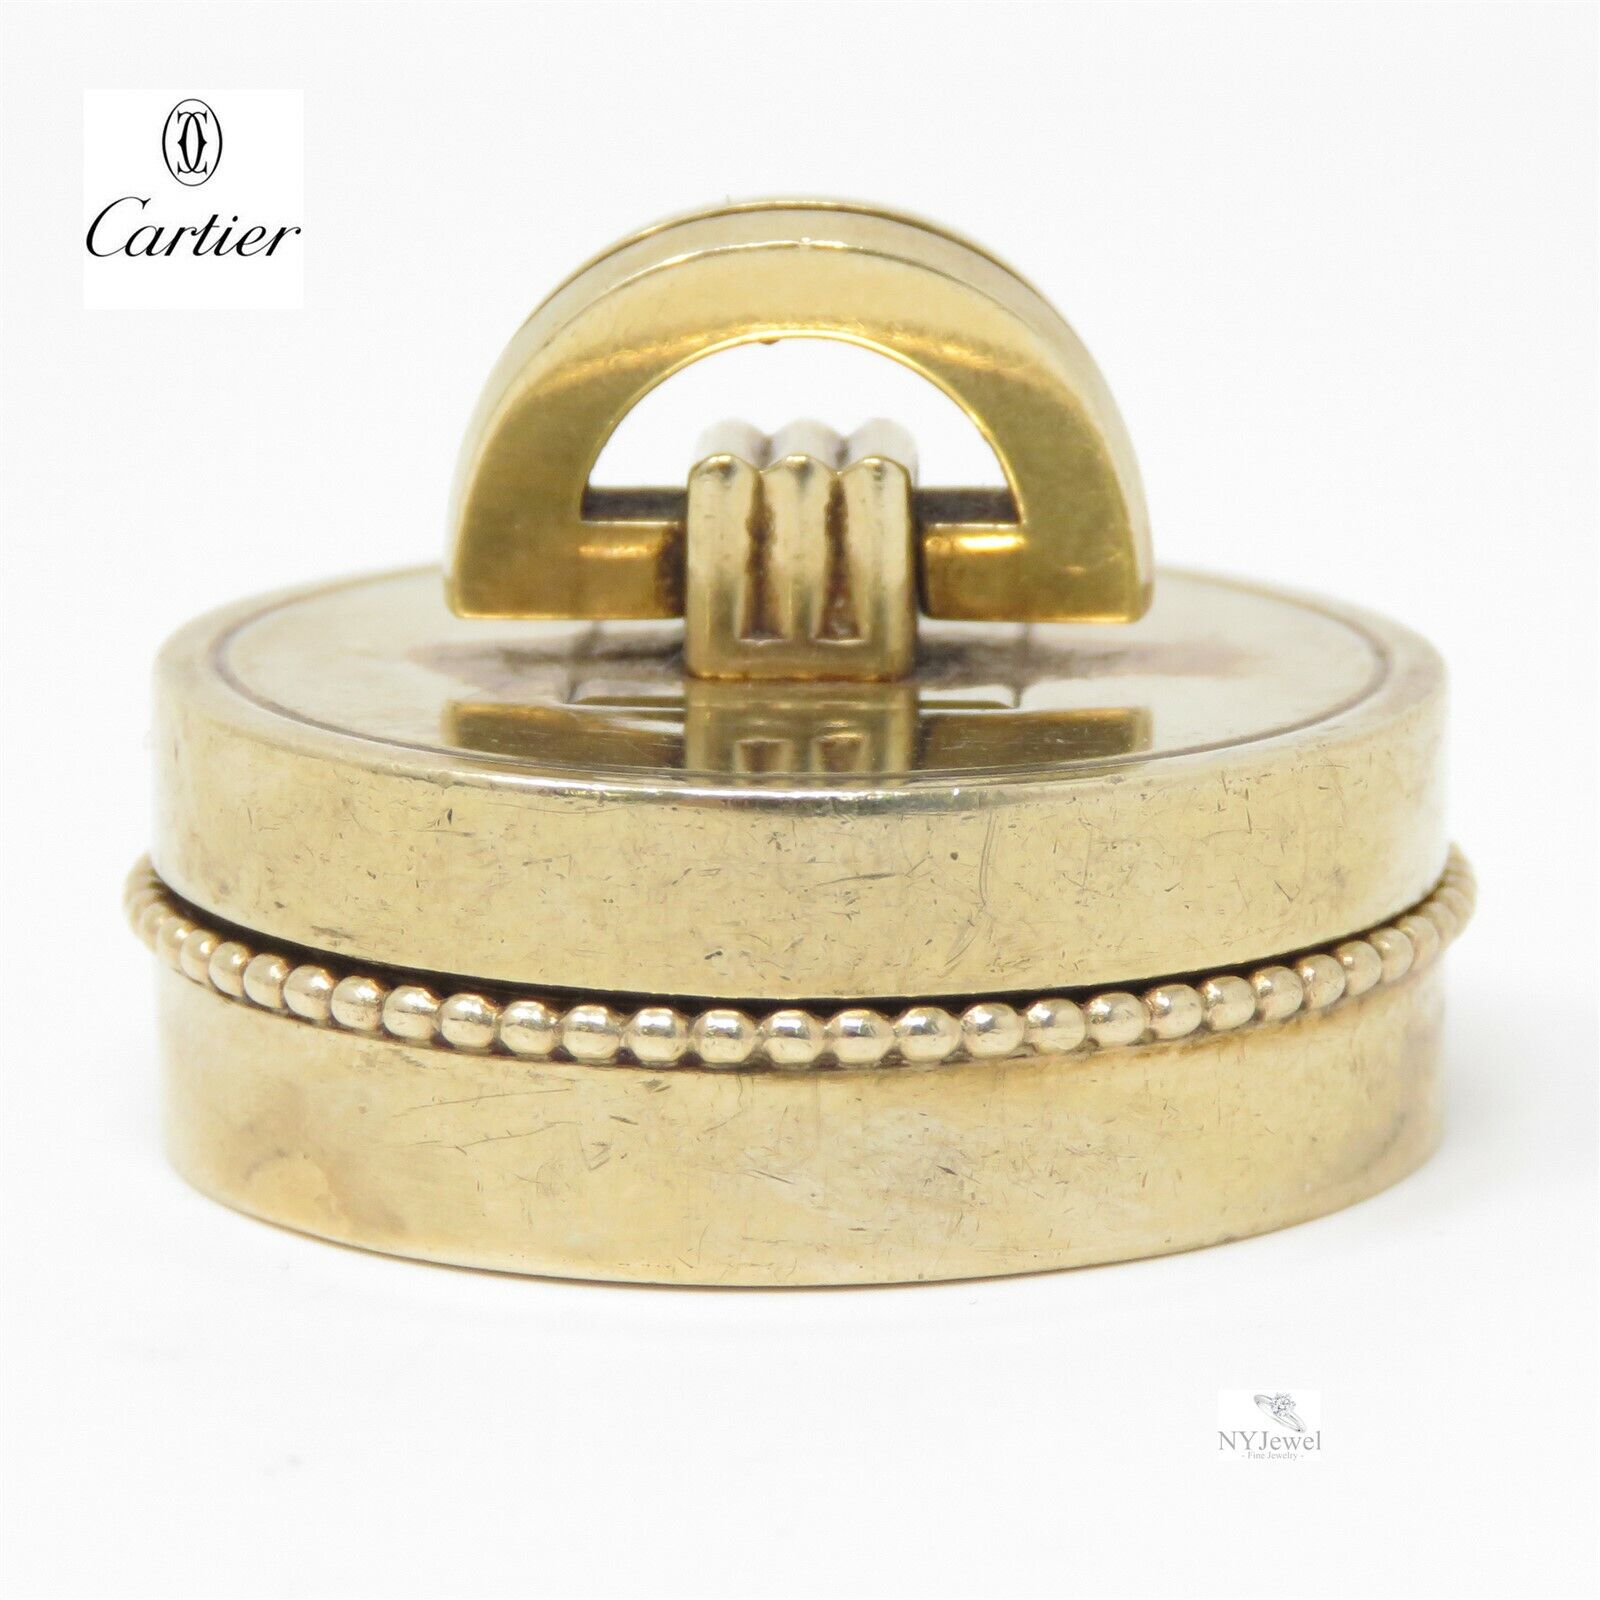 NYJEWEL Cartier London 9K Yellow Gold Round Pill Box with Removable Lid